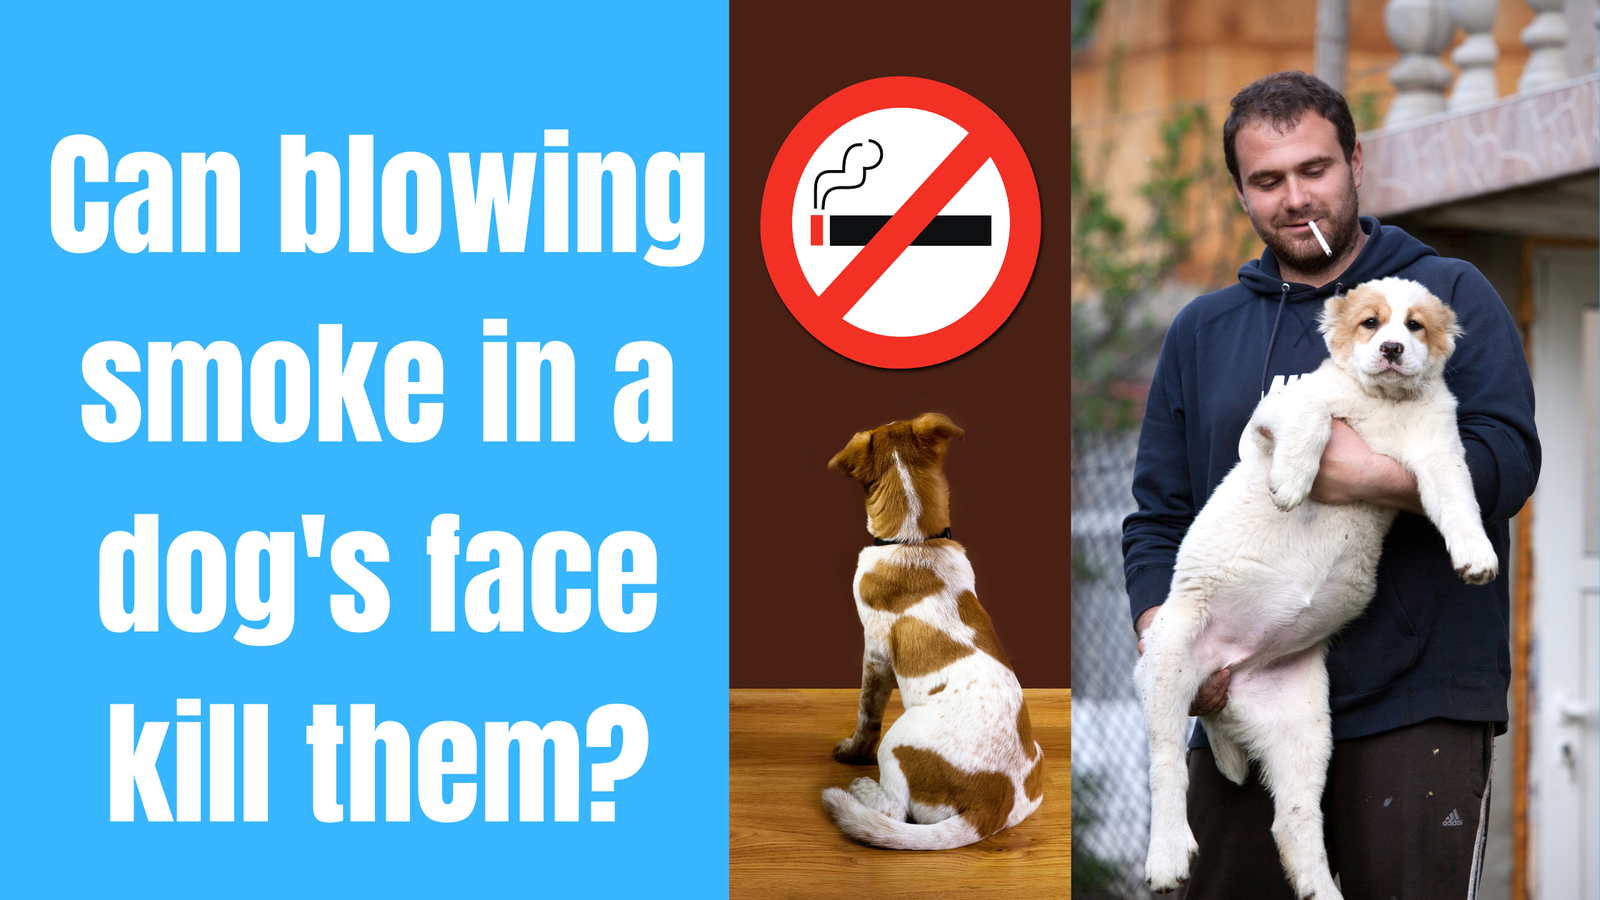 Can blowing smoke in a dog's face kill them